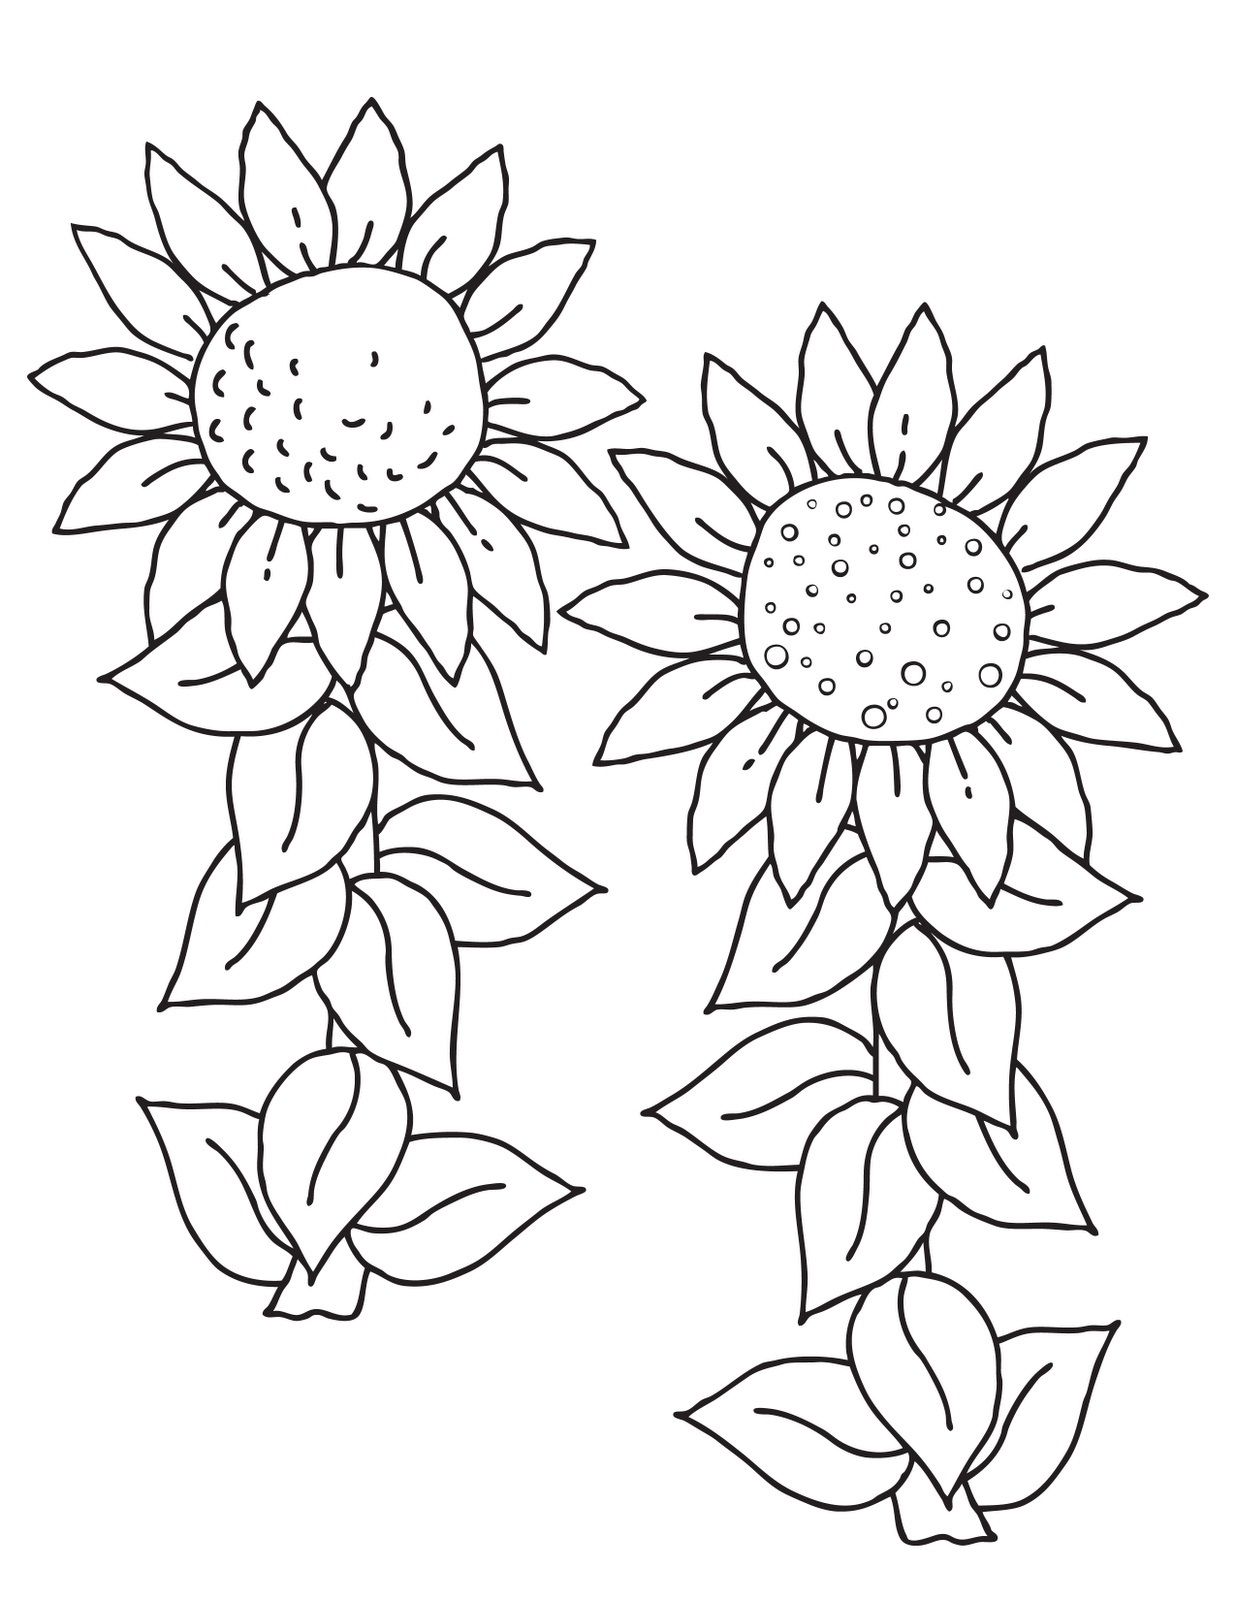 Sunflower coloring #11, Download drawings